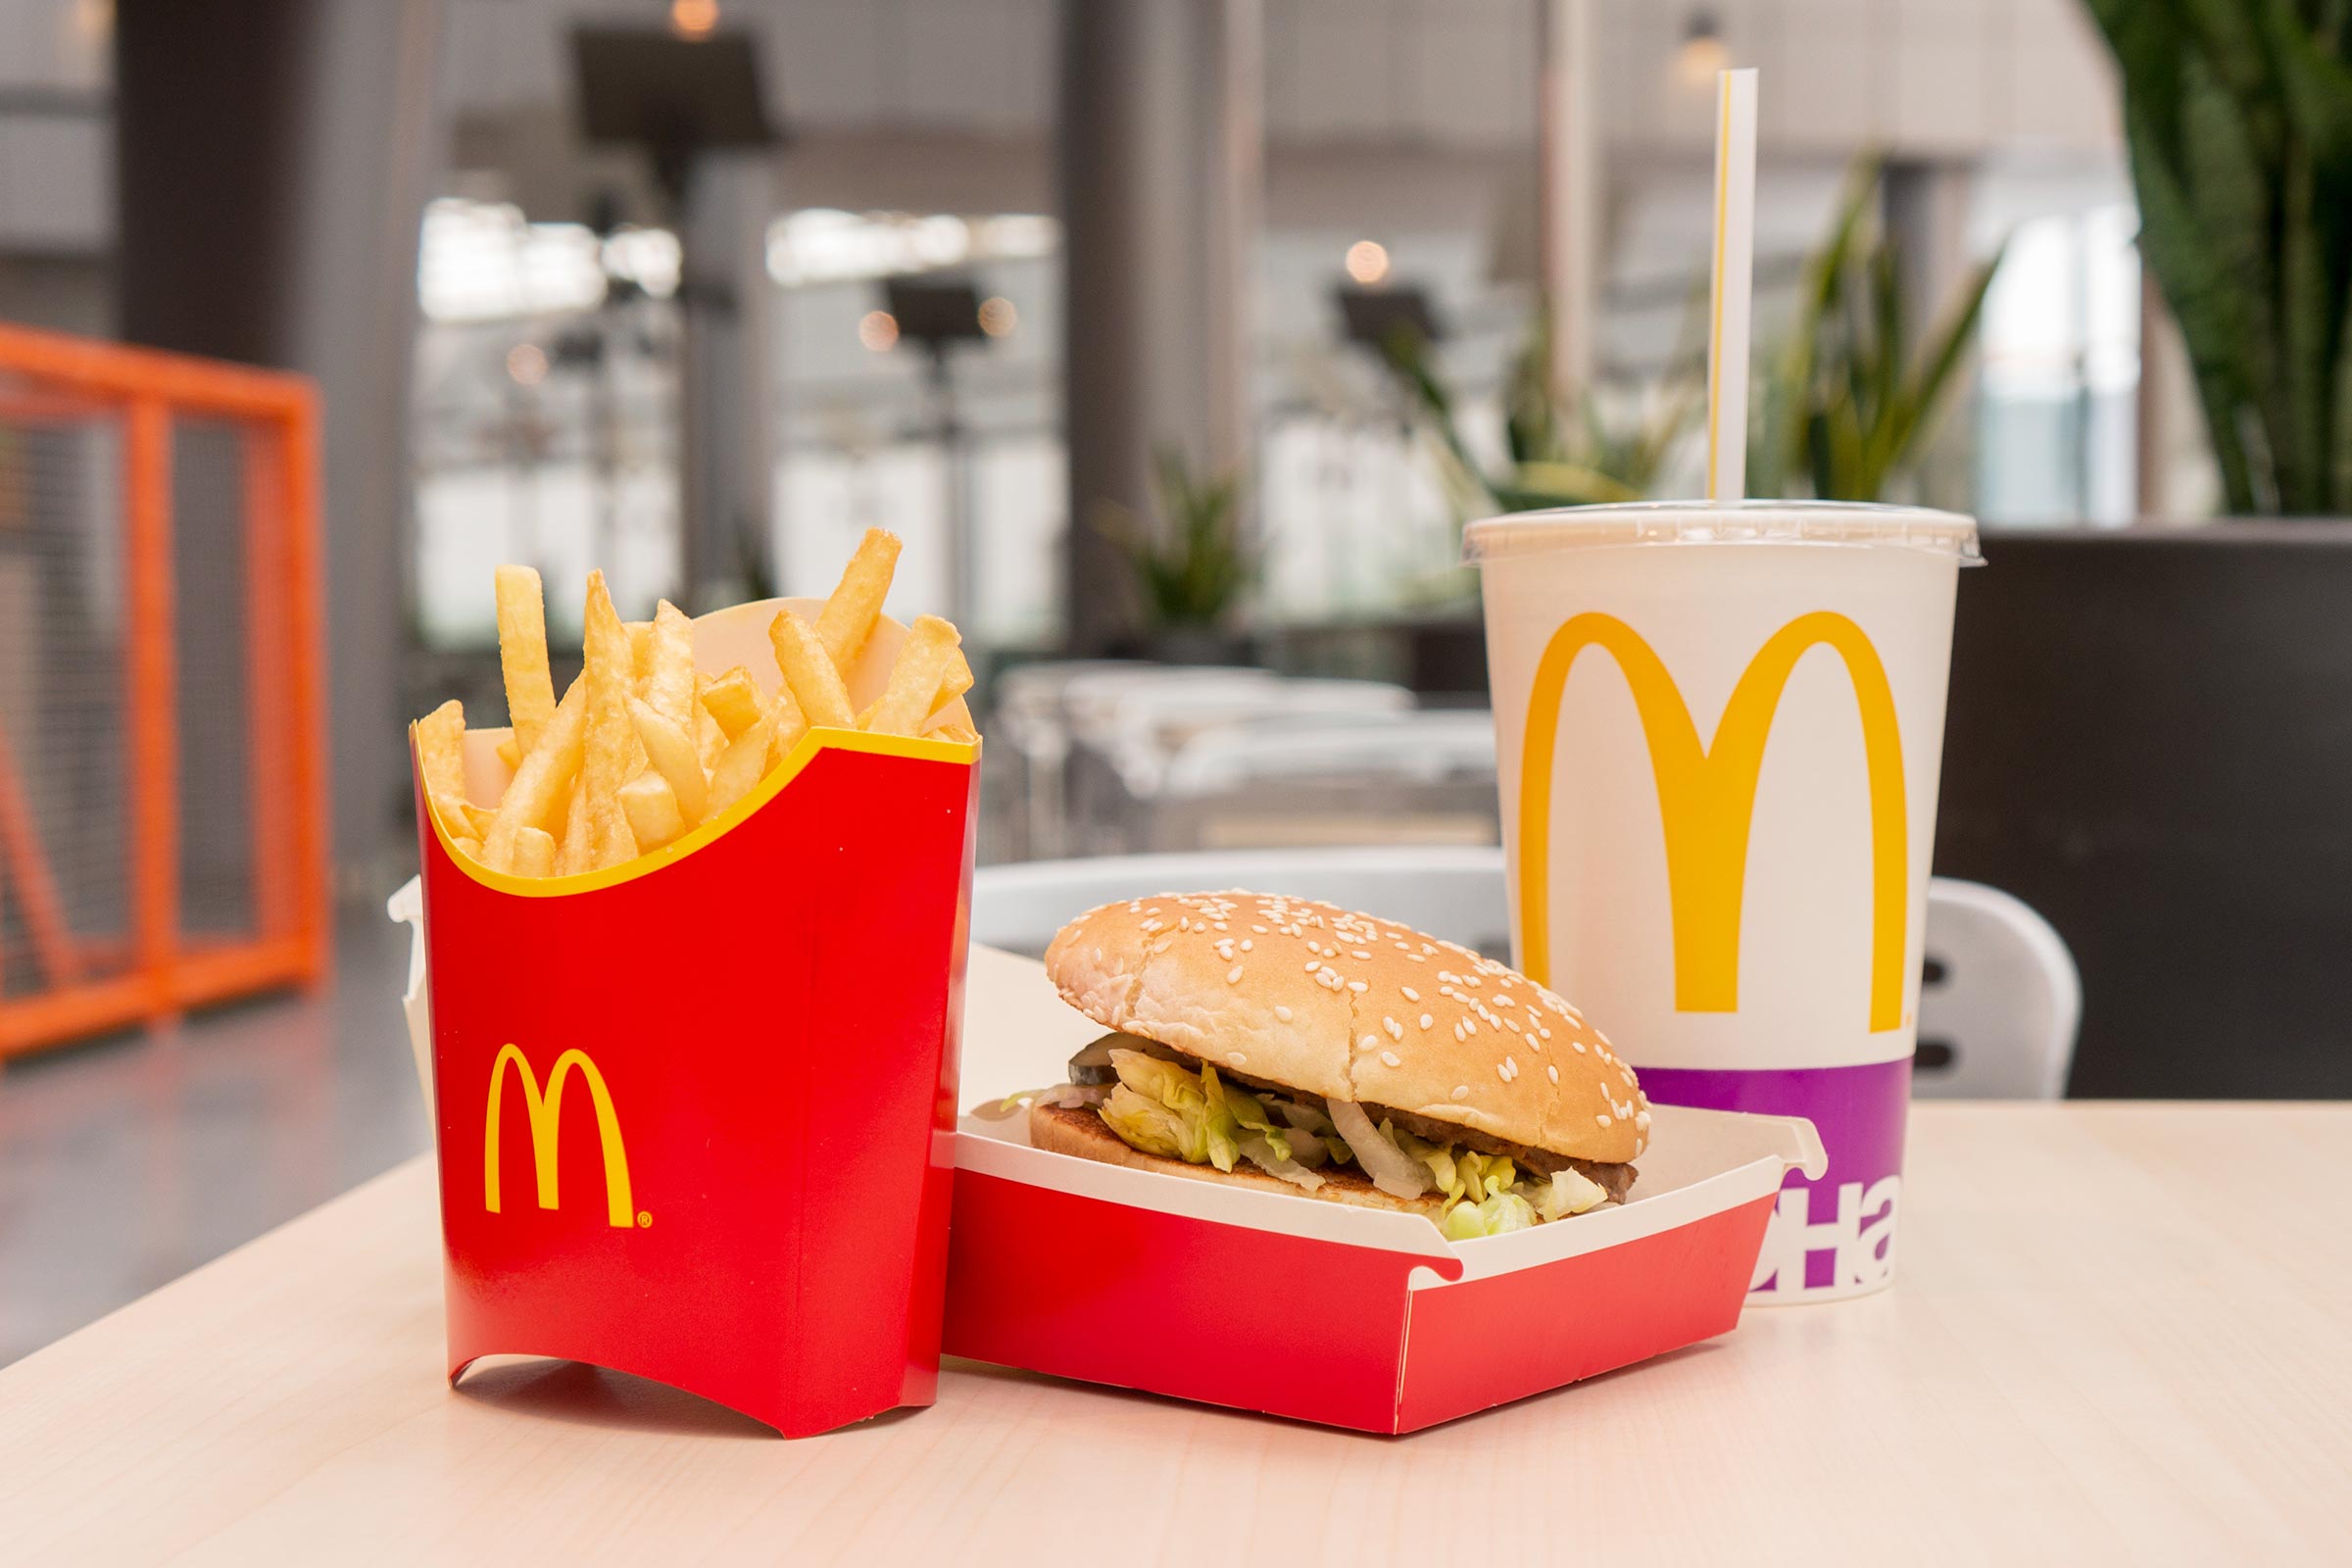 McDonald’s launches a unique ‘On-the-go’ service! An app that feeds the